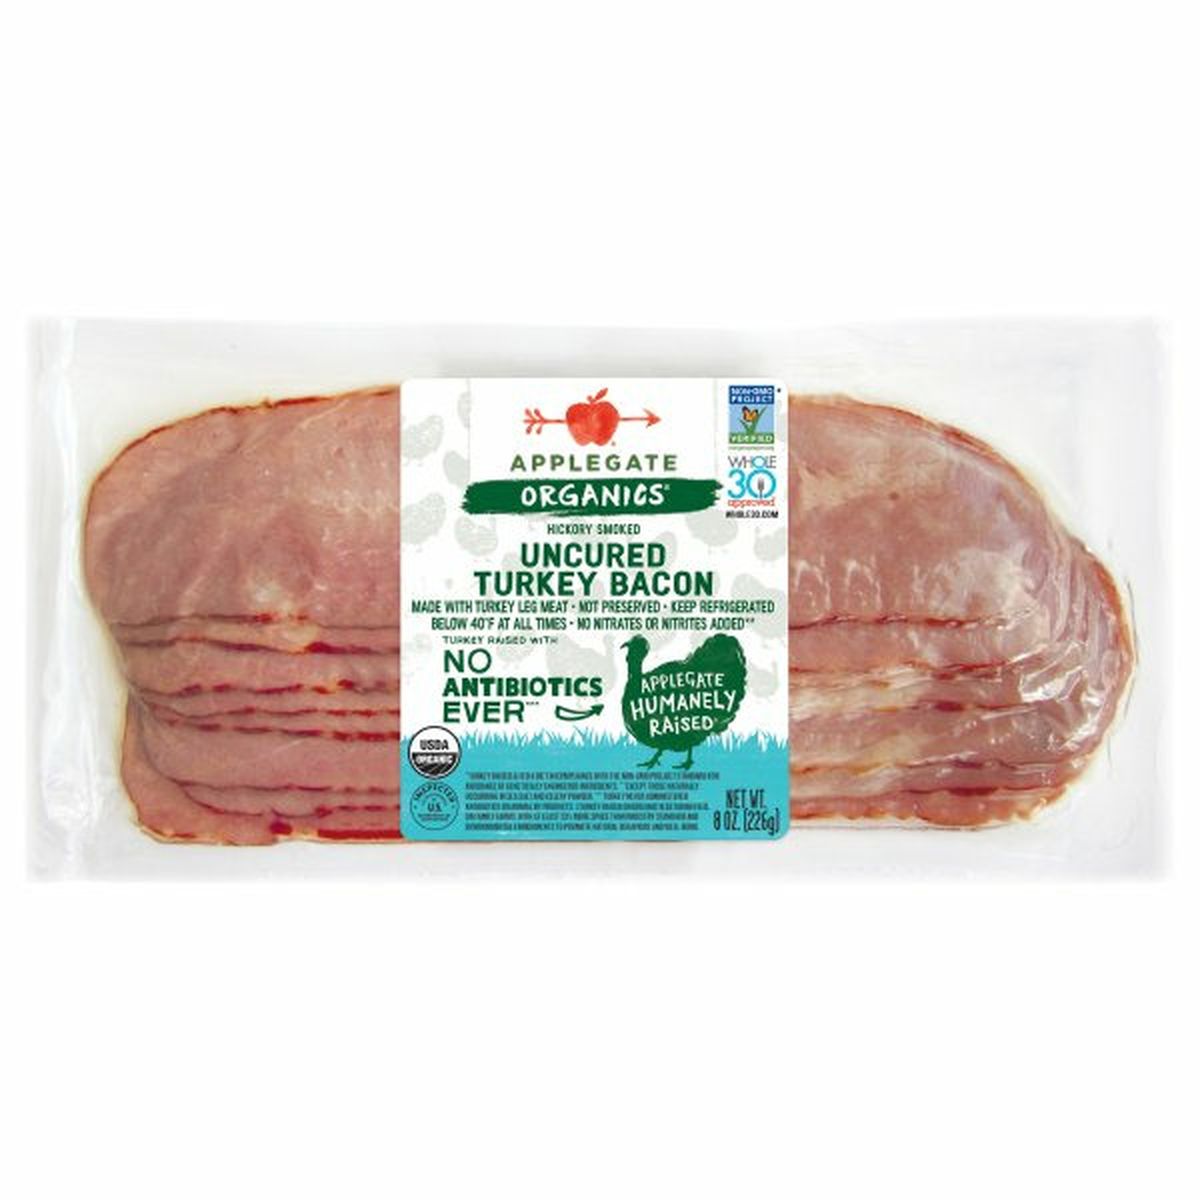 Calories in Applegate Organics Turkey Bacon, Uncured, Hickory Smoked